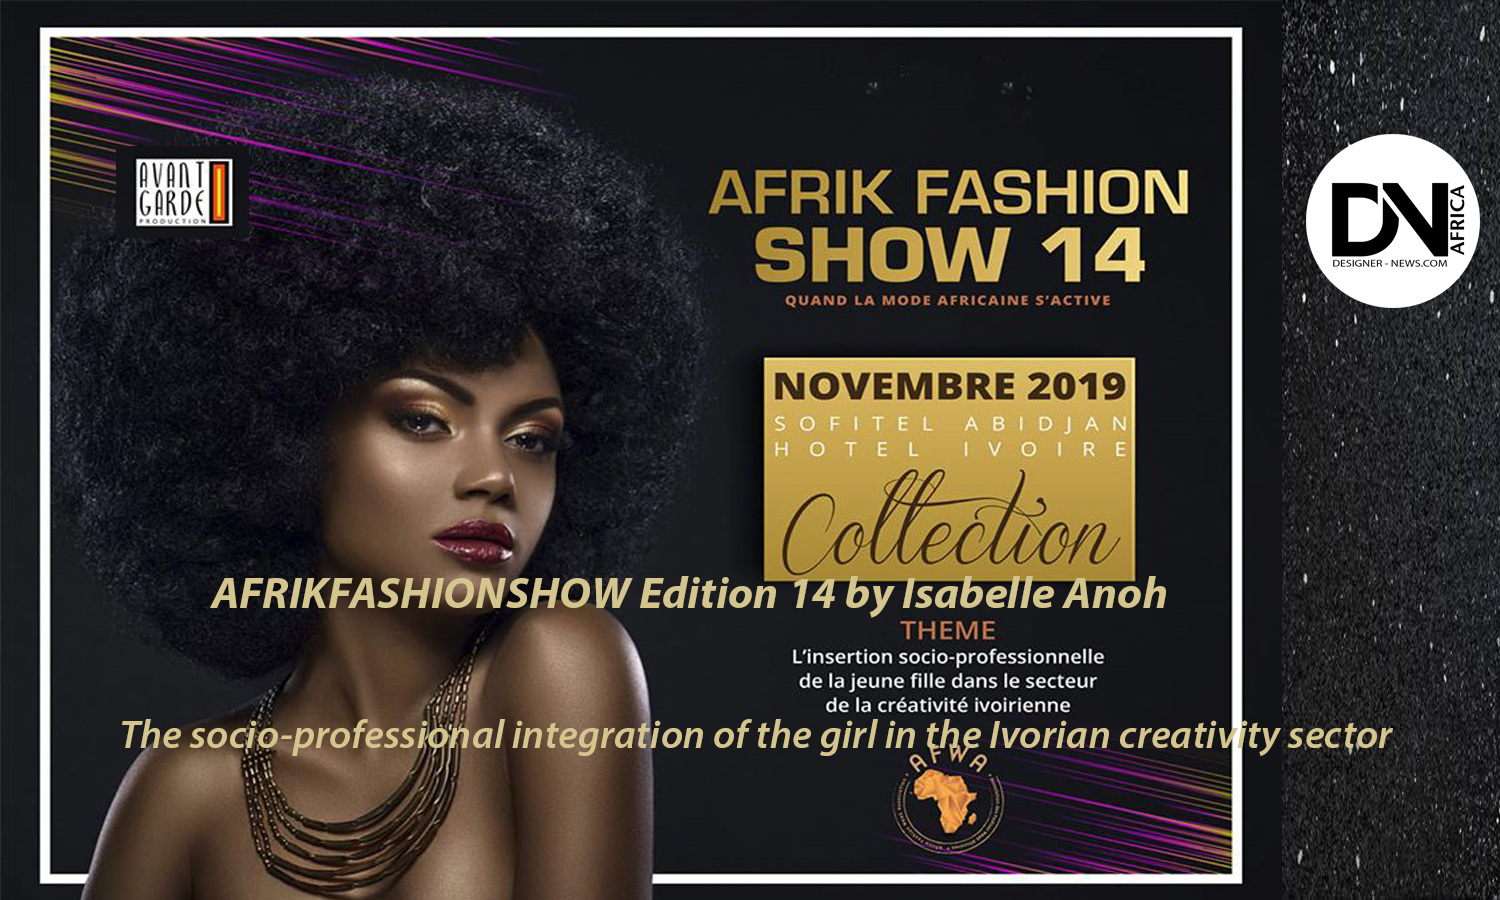 AFRICAN FASHION STYLE MAGAZINE - AFRIK FASHION SHOW 14 BY Isabelle Anoh & AVANT GARDE PRODUCTION -The-socio-professional-integration-of-the-girl - Designer PATHEO - Location Palais des Congres - Sofitel IVOIRE ABIDJAN Ivory Coast - Photographer DAN NGU - Media Partner DN AFRICA - STUDIO 24 NIGERIA - STUDIO 24 INTERNATIONAL - Ifeanyi Christopher Oputa MD AND CEO OF COLVI LIMITED AND STUDIO 24 - Nahomie NOOR COULIBALY